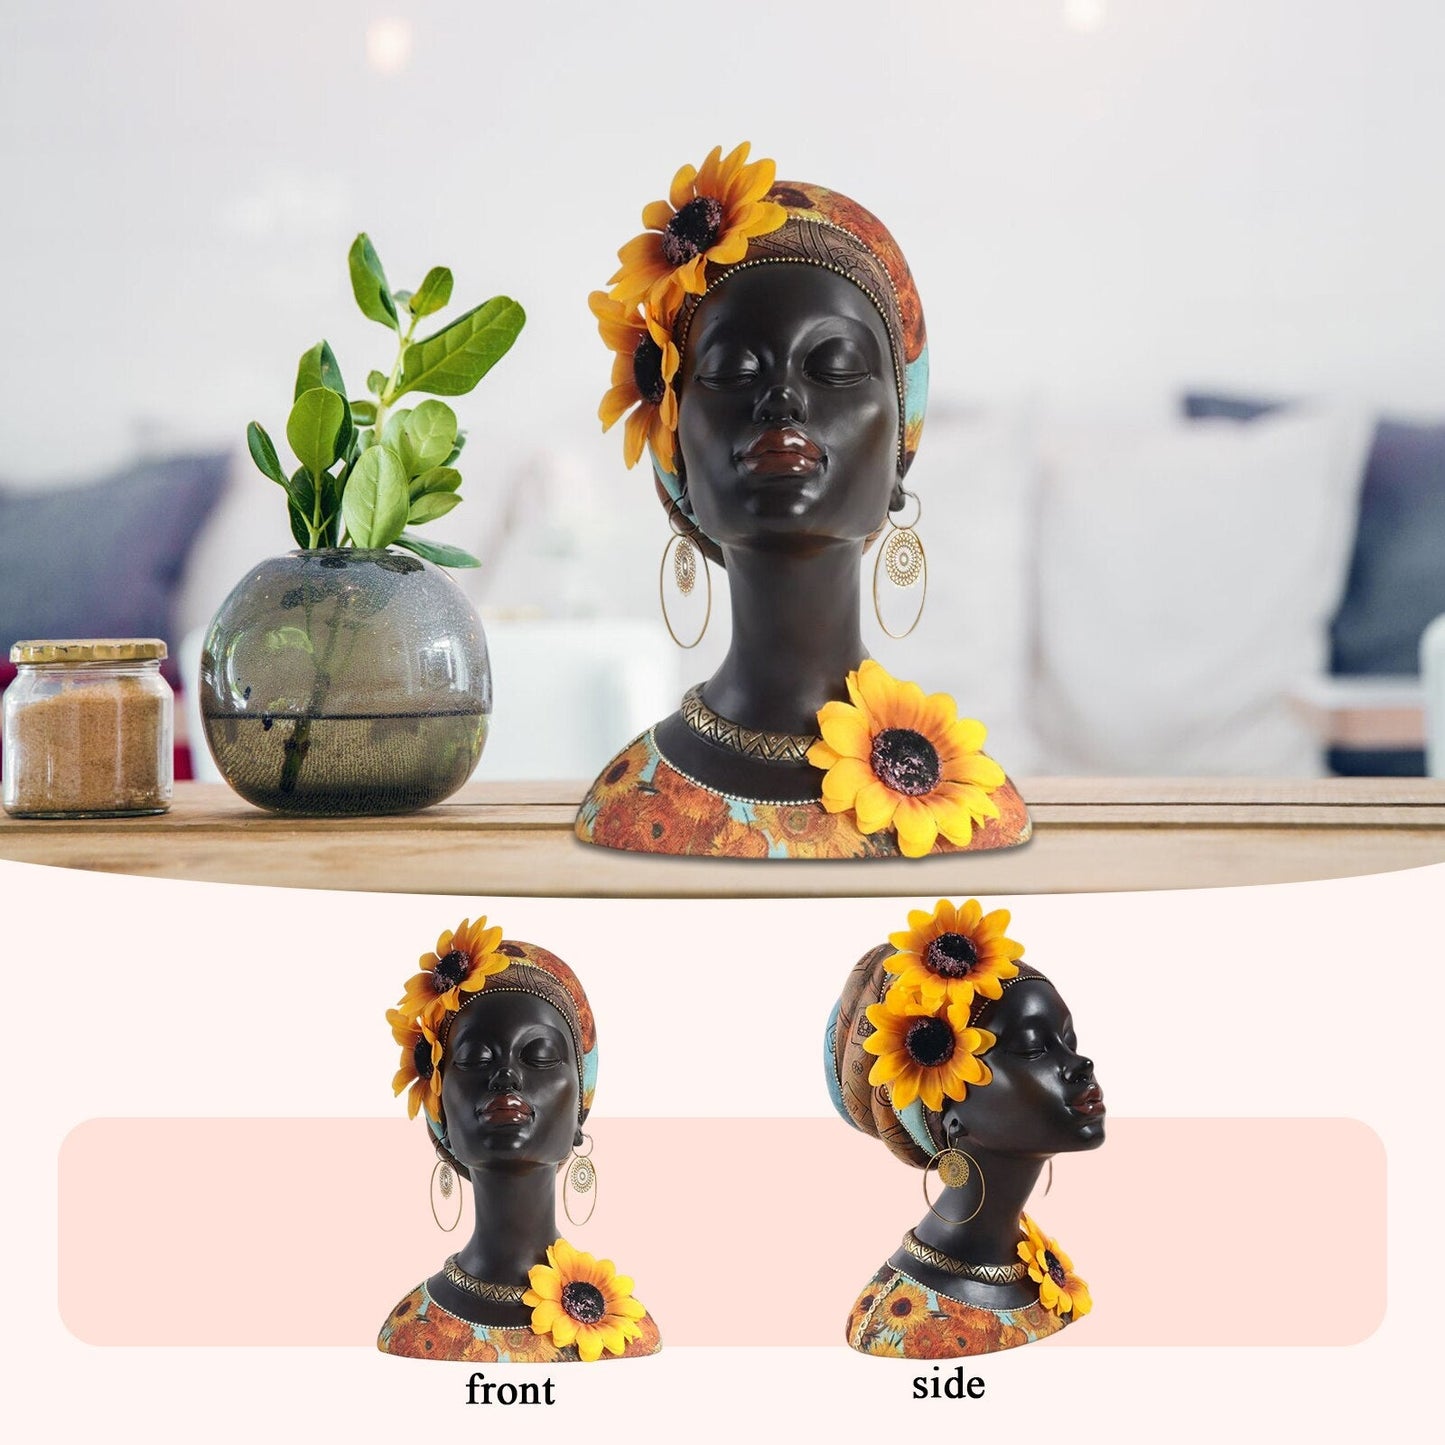 Harts Tribal Female Staty Ornaments Vintage African Women Figur Figurin Collectible Art Handicrafts Home Decor for TV Cabinet